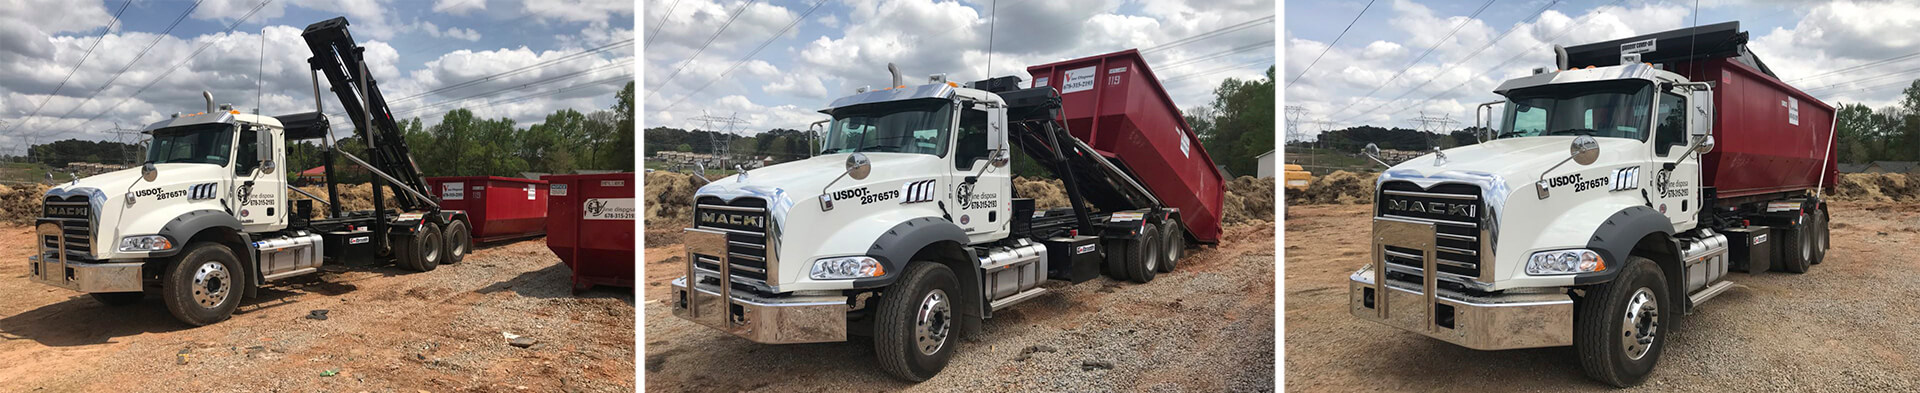 Dumpster Rentals in Indian Trail, NC